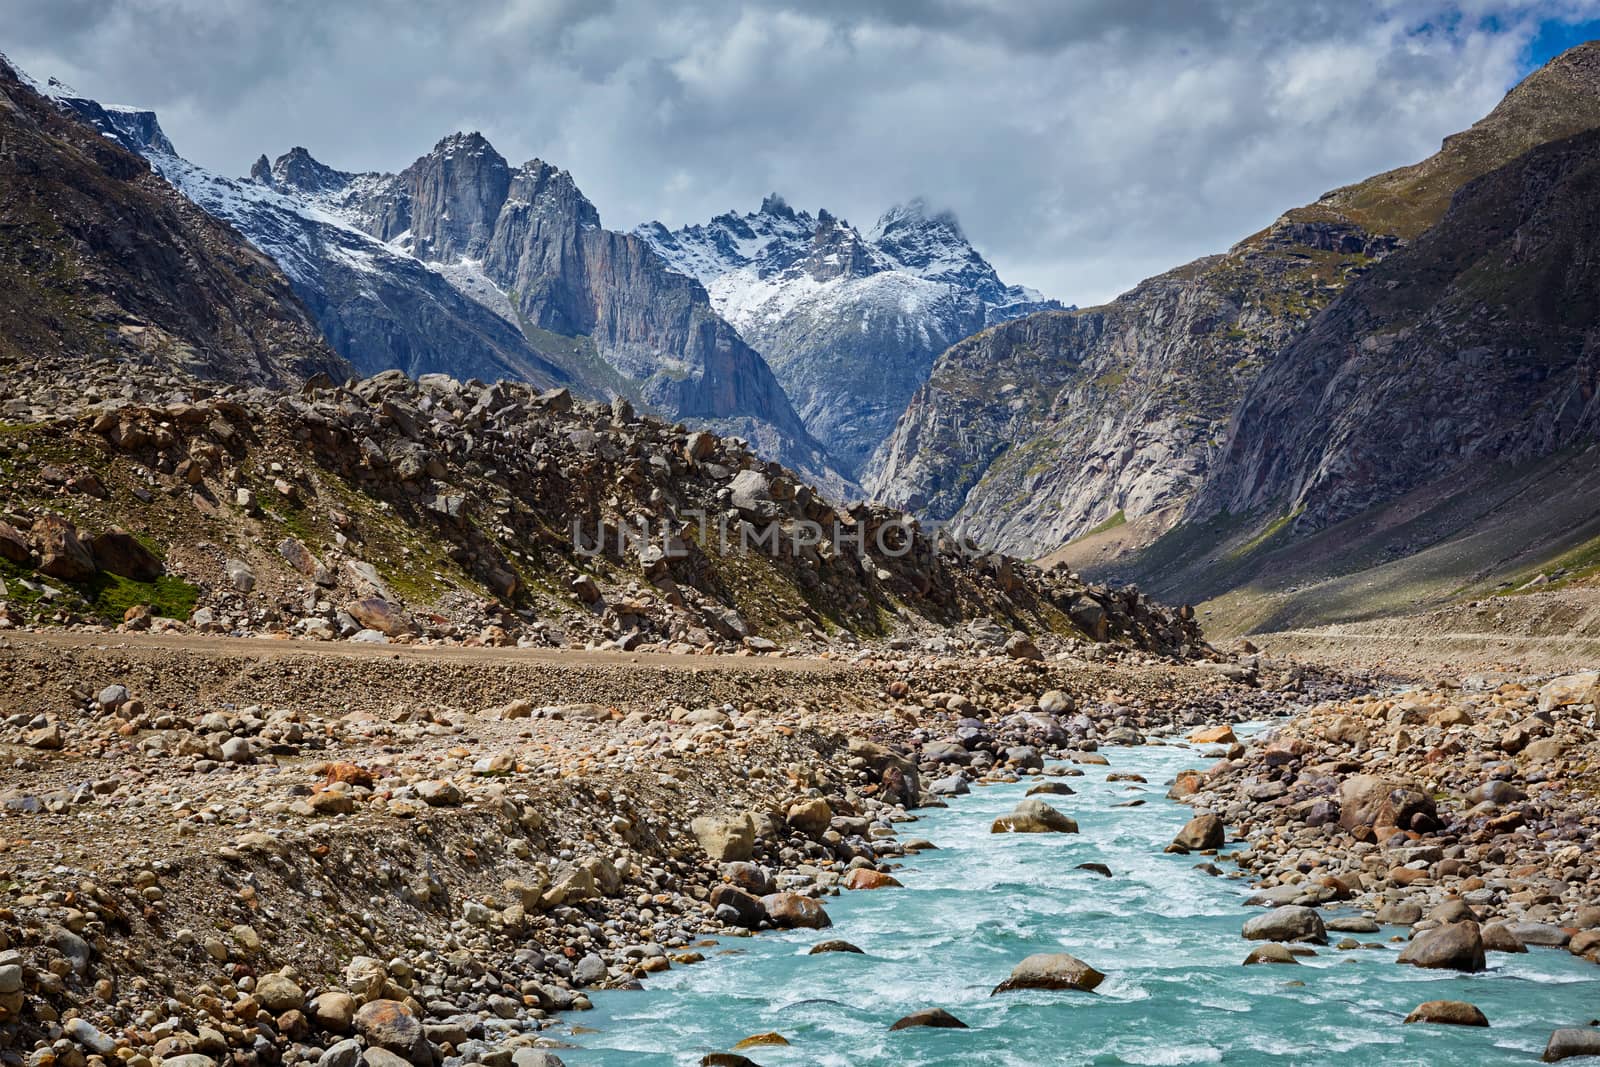 Chandra River in Lahaul Valley in Himalayas by dimol